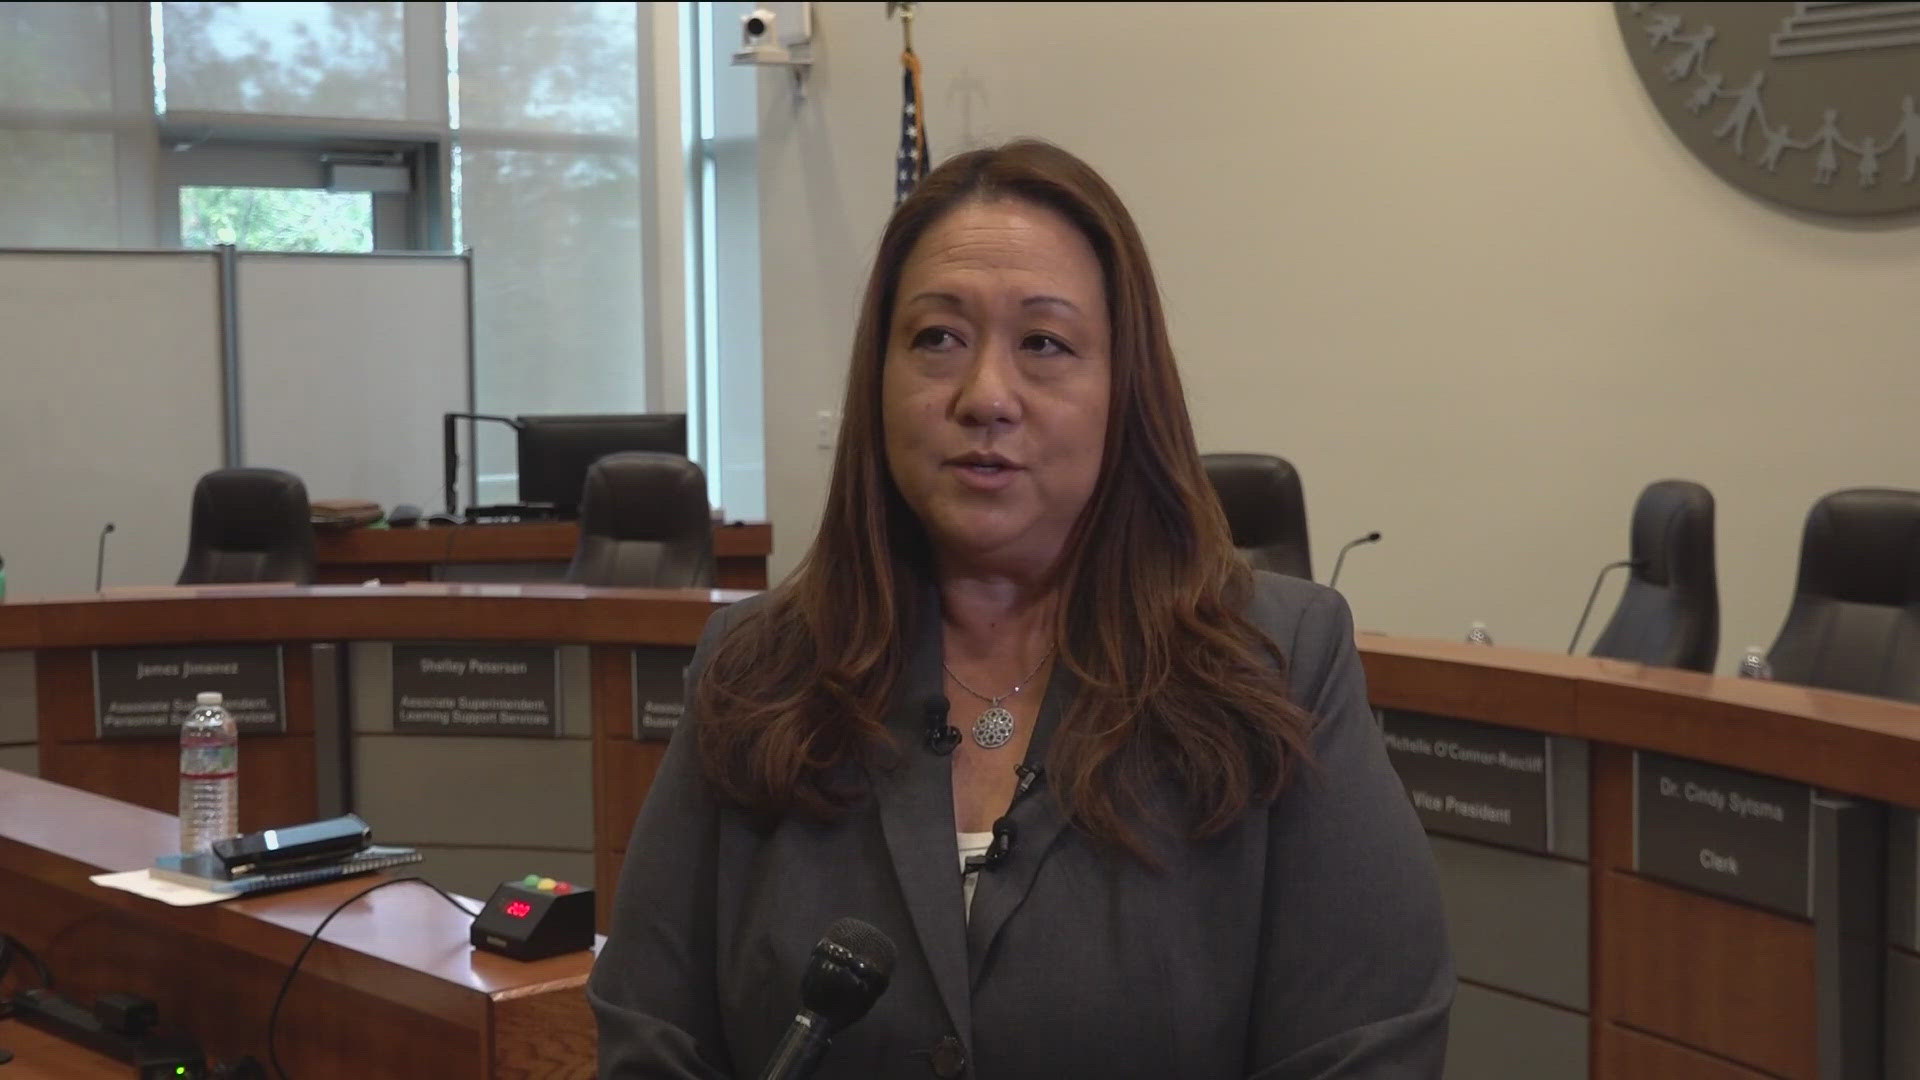 New lawsuit includes text messages and late night calls from Superintendent Marian Phelps in response to Del Norte High Softball team not clapping for her daughter.